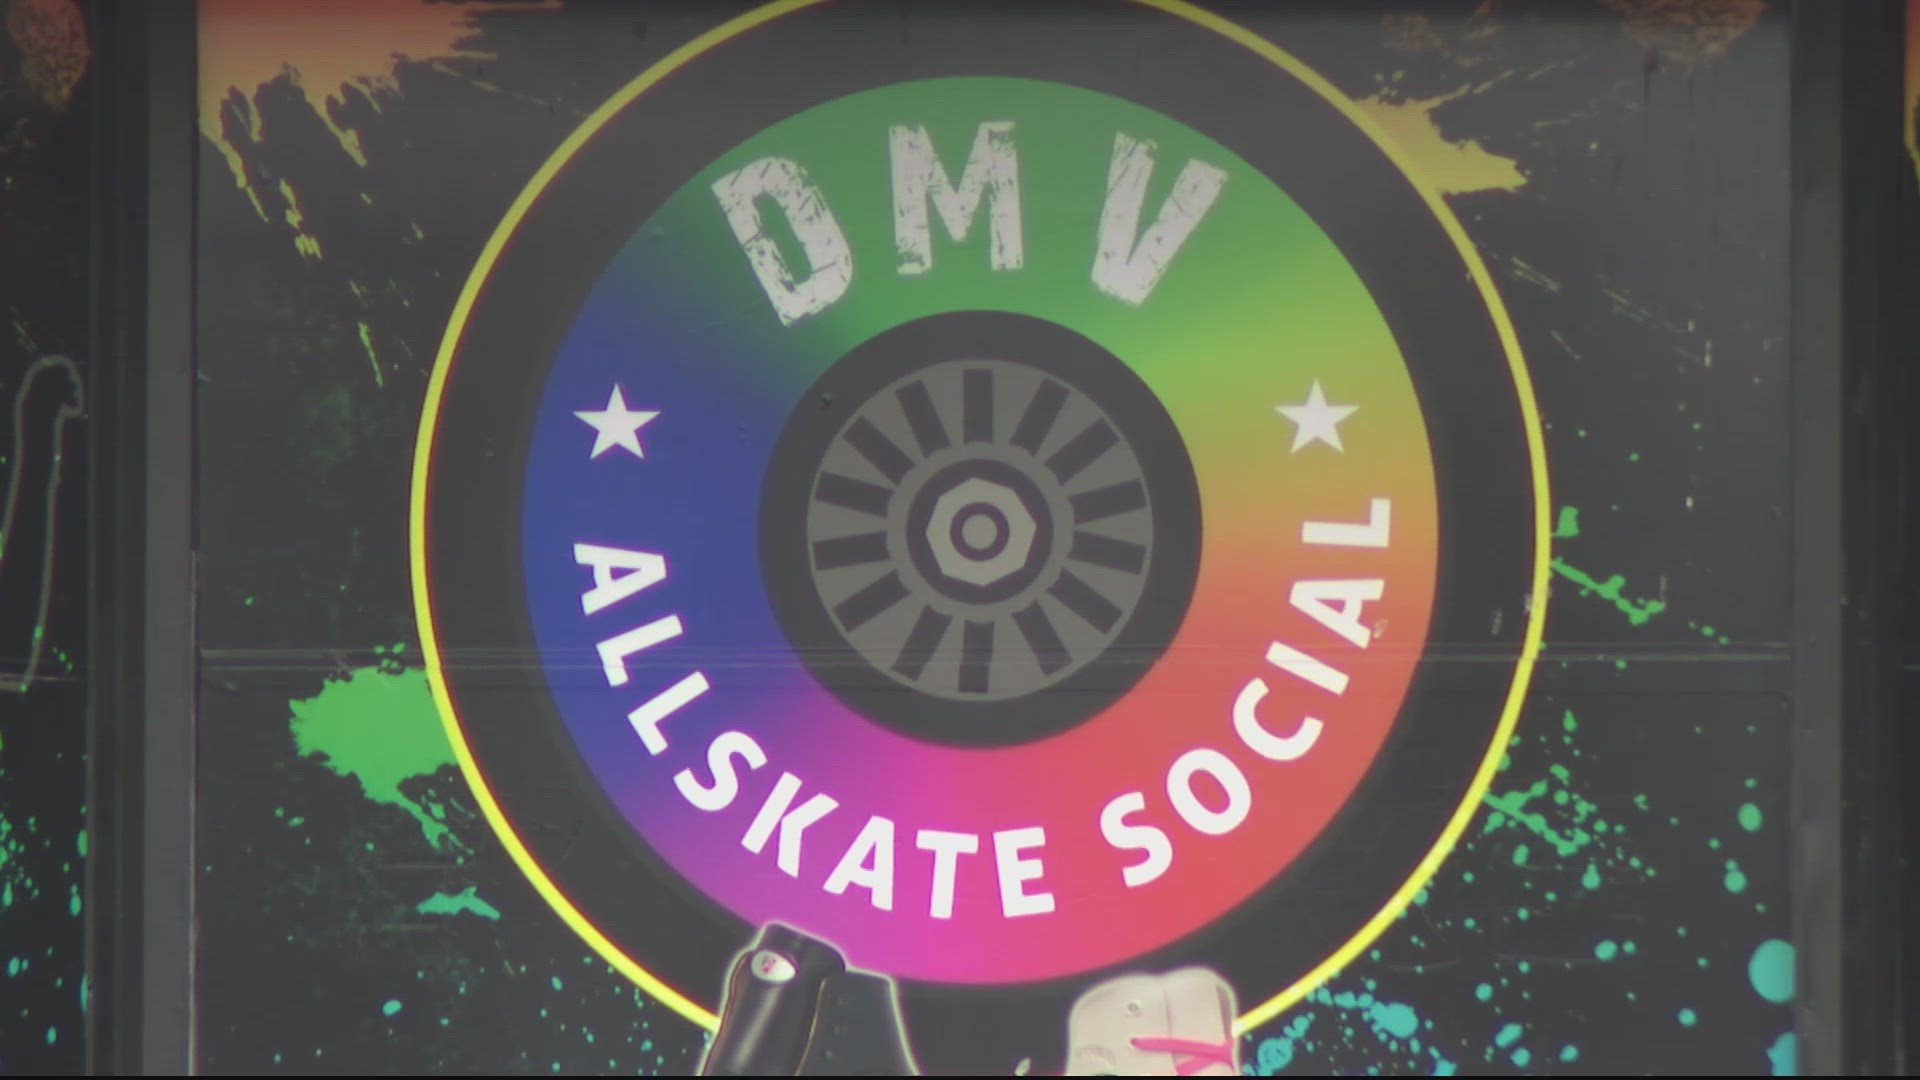 DMV AllSkate Social has not been cited for any additional violations in the wake of the citation ordering them to stop.